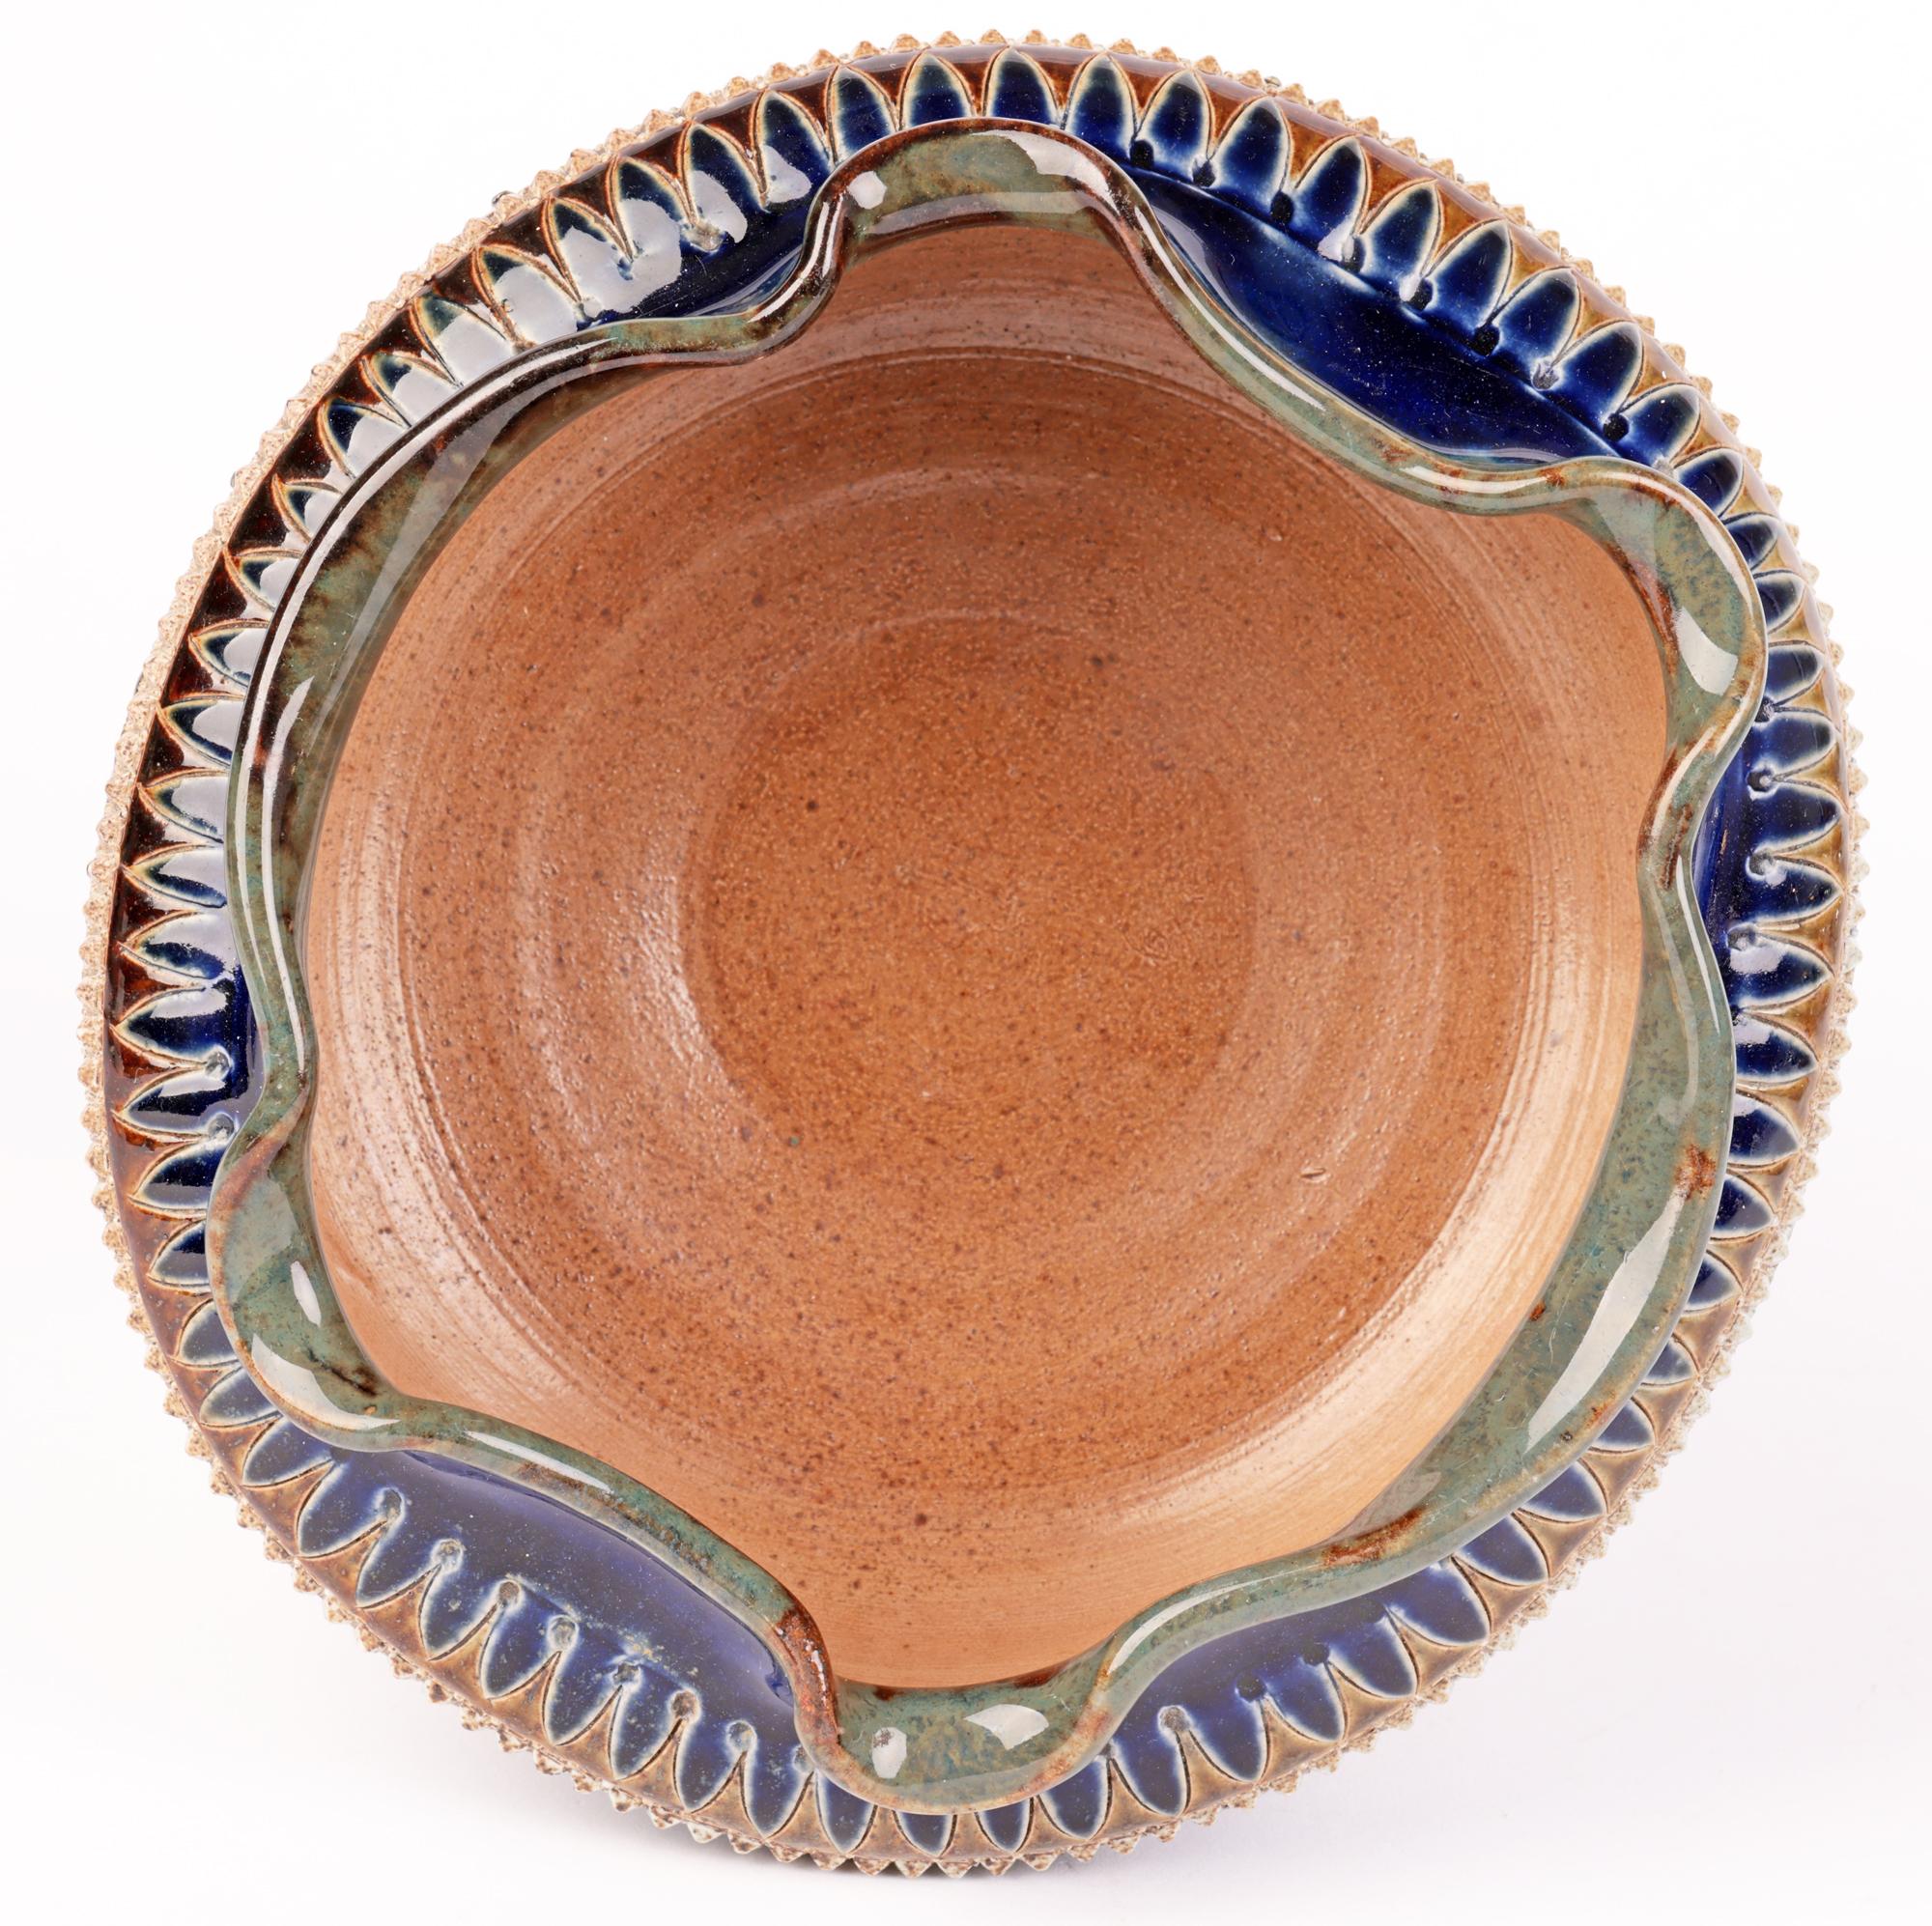 English George Tinworth Doulton Lambeth Aesthetic Movement Pottery Bowl, 1879 For Sale